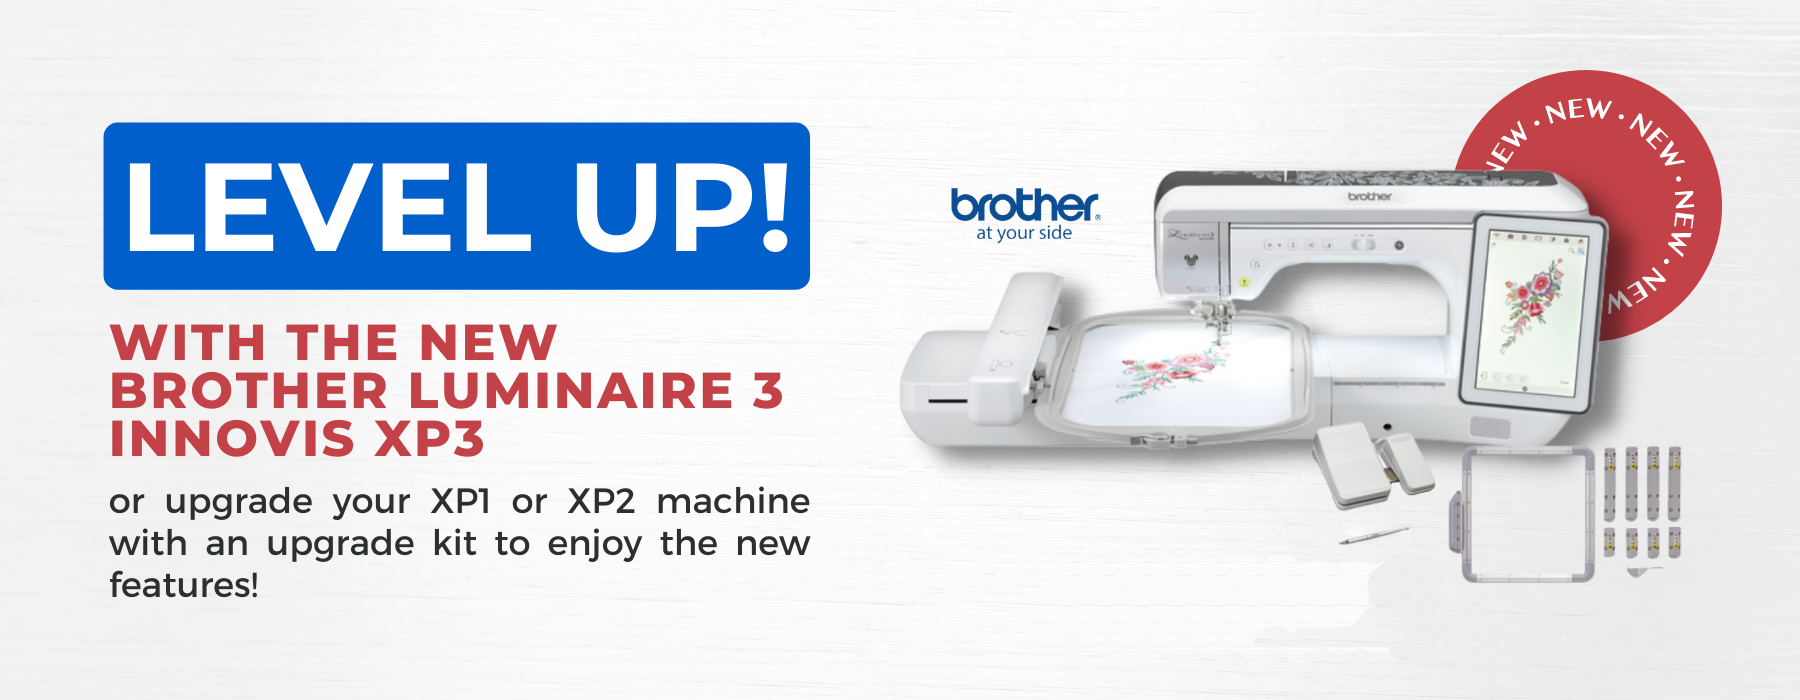 xp3 pictured. Level up with the new brother luminaire xp3. or upgrade your xp1 or xp2 machine with and upgrade kit to enjoy the new features